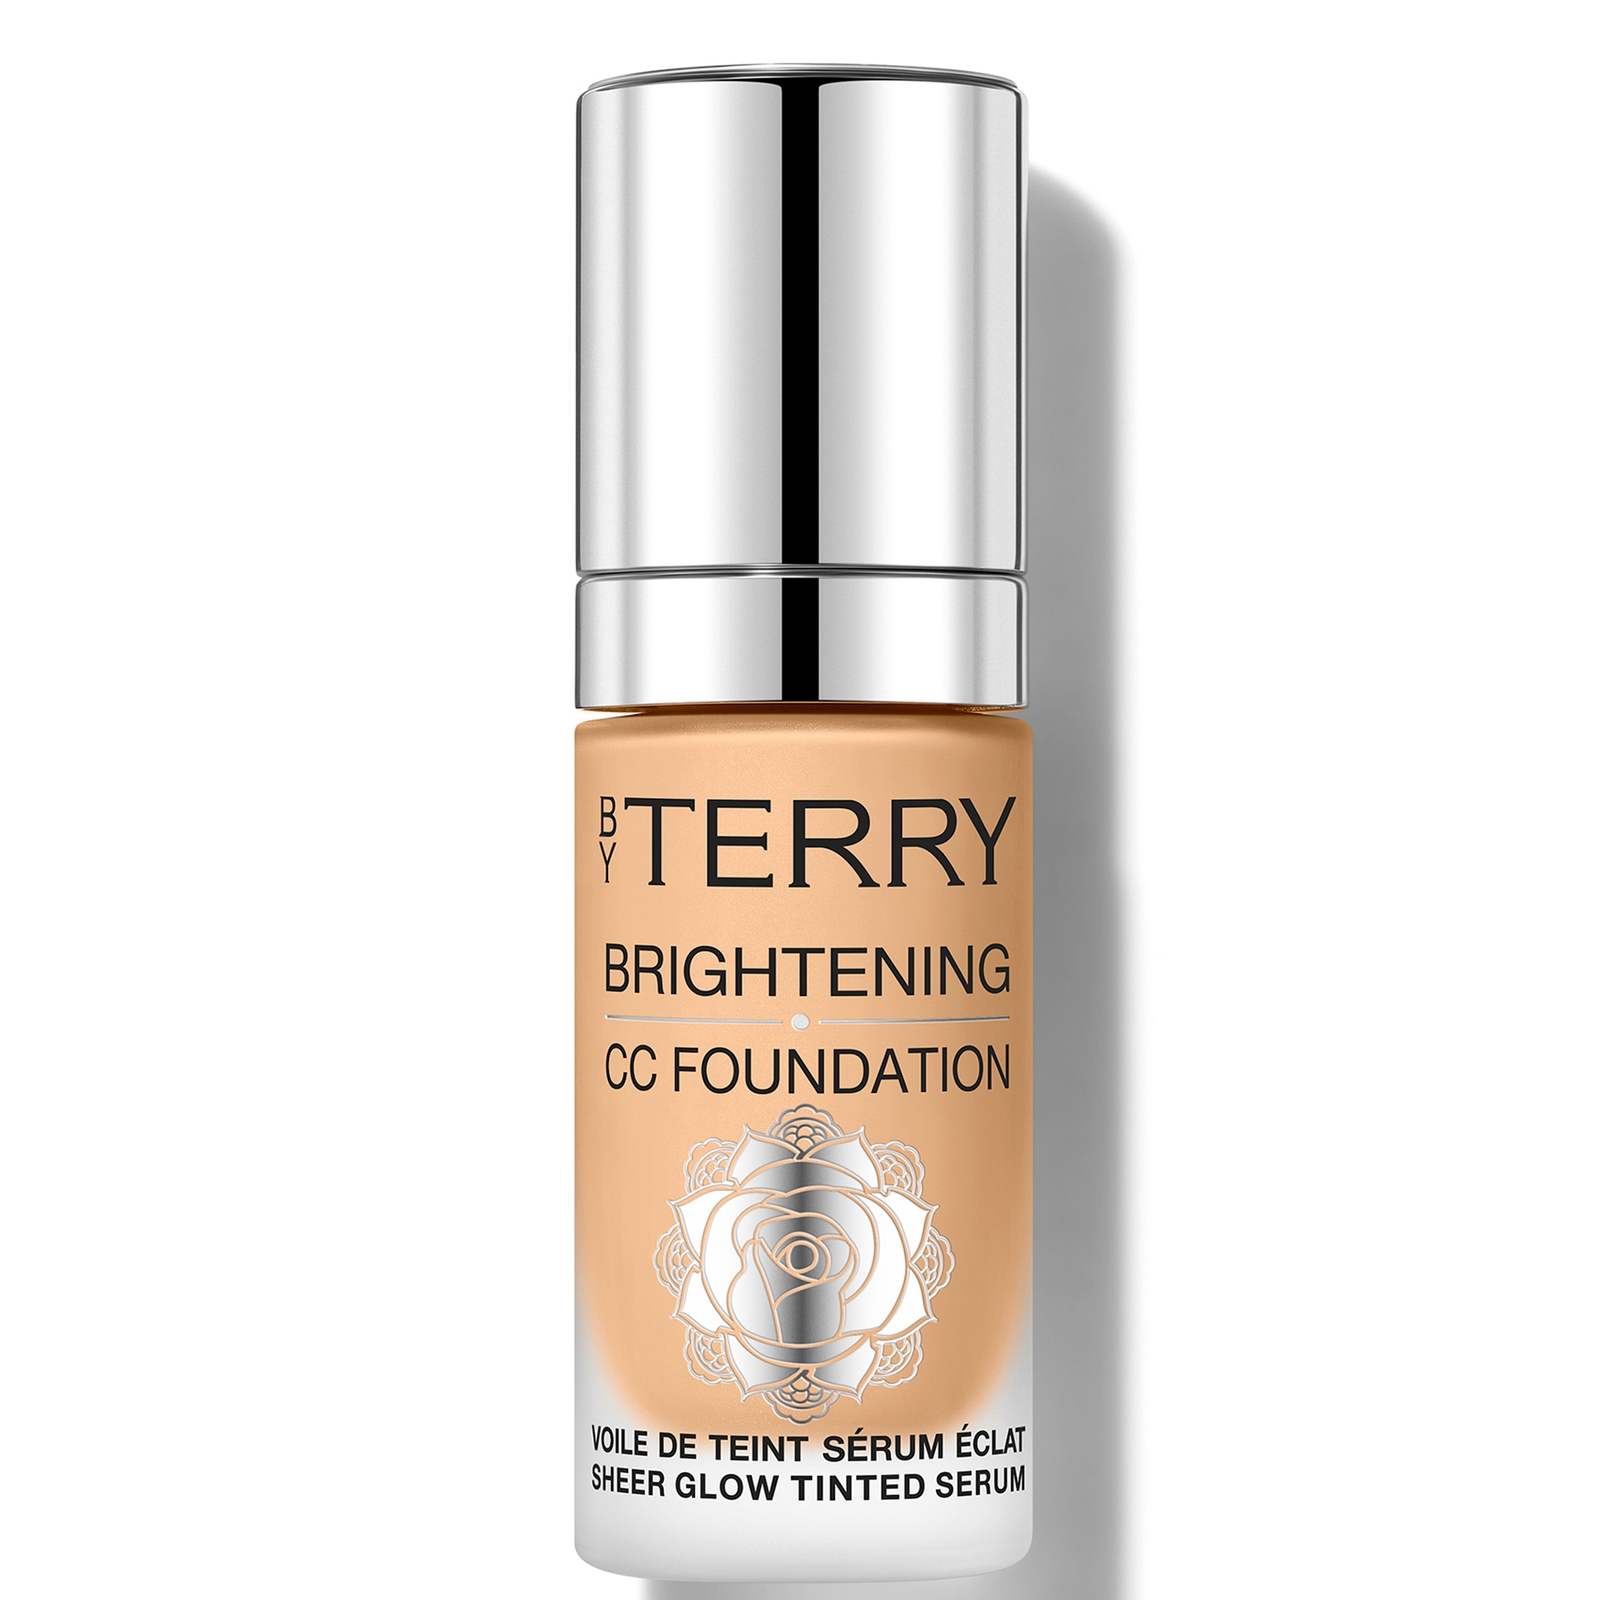 Image of By Terry Brightening CC Foundation 30ml (Various Shades) - 5N - MEDIUM TAN NEUTRAL